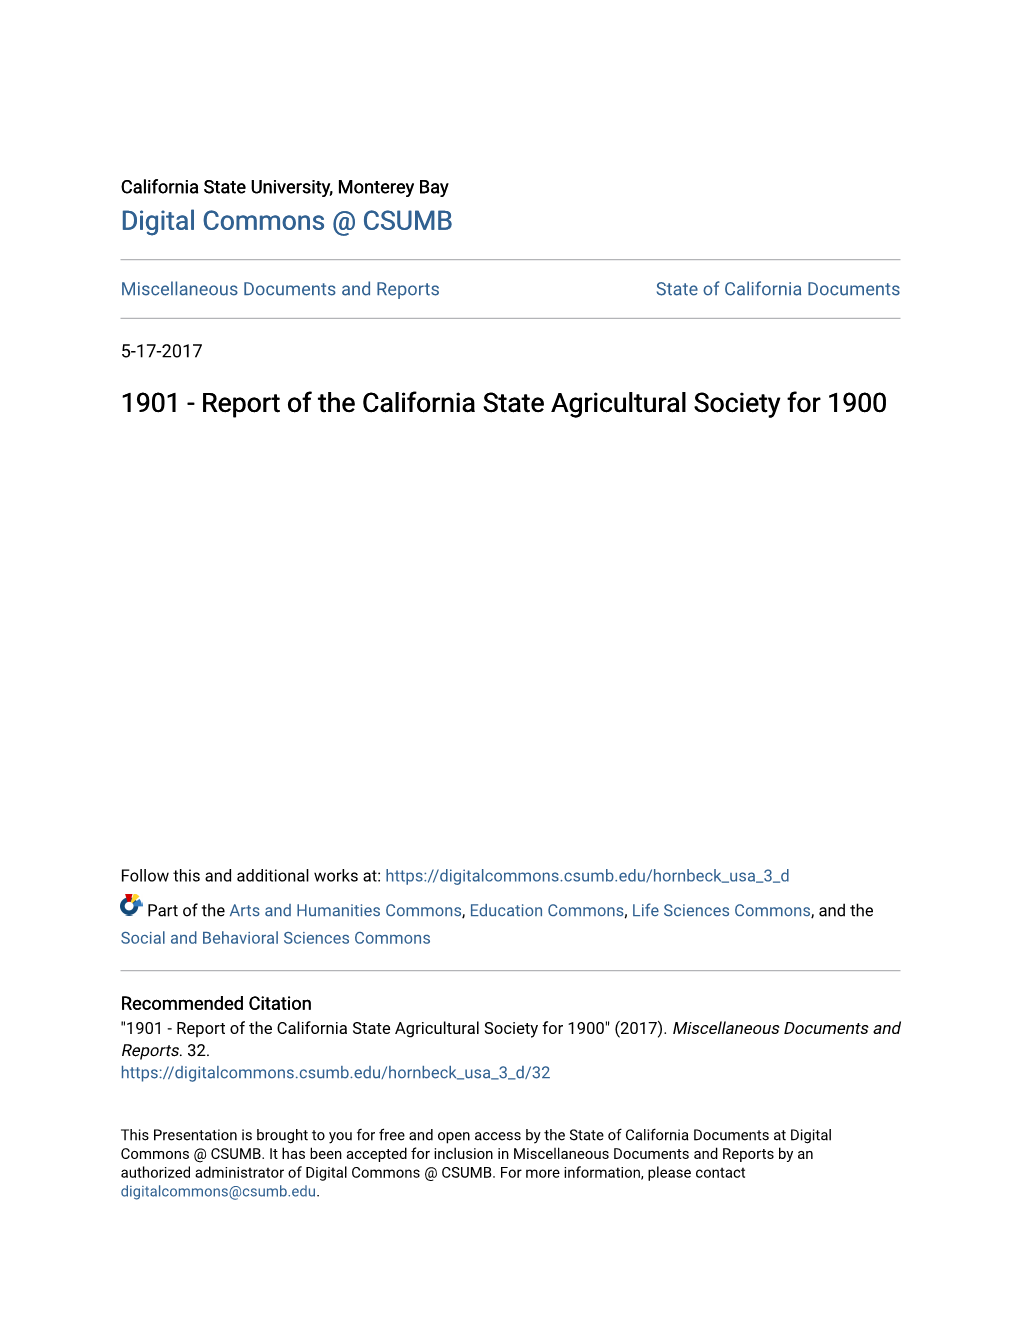 Report of the California State Agricultural Society for 1900